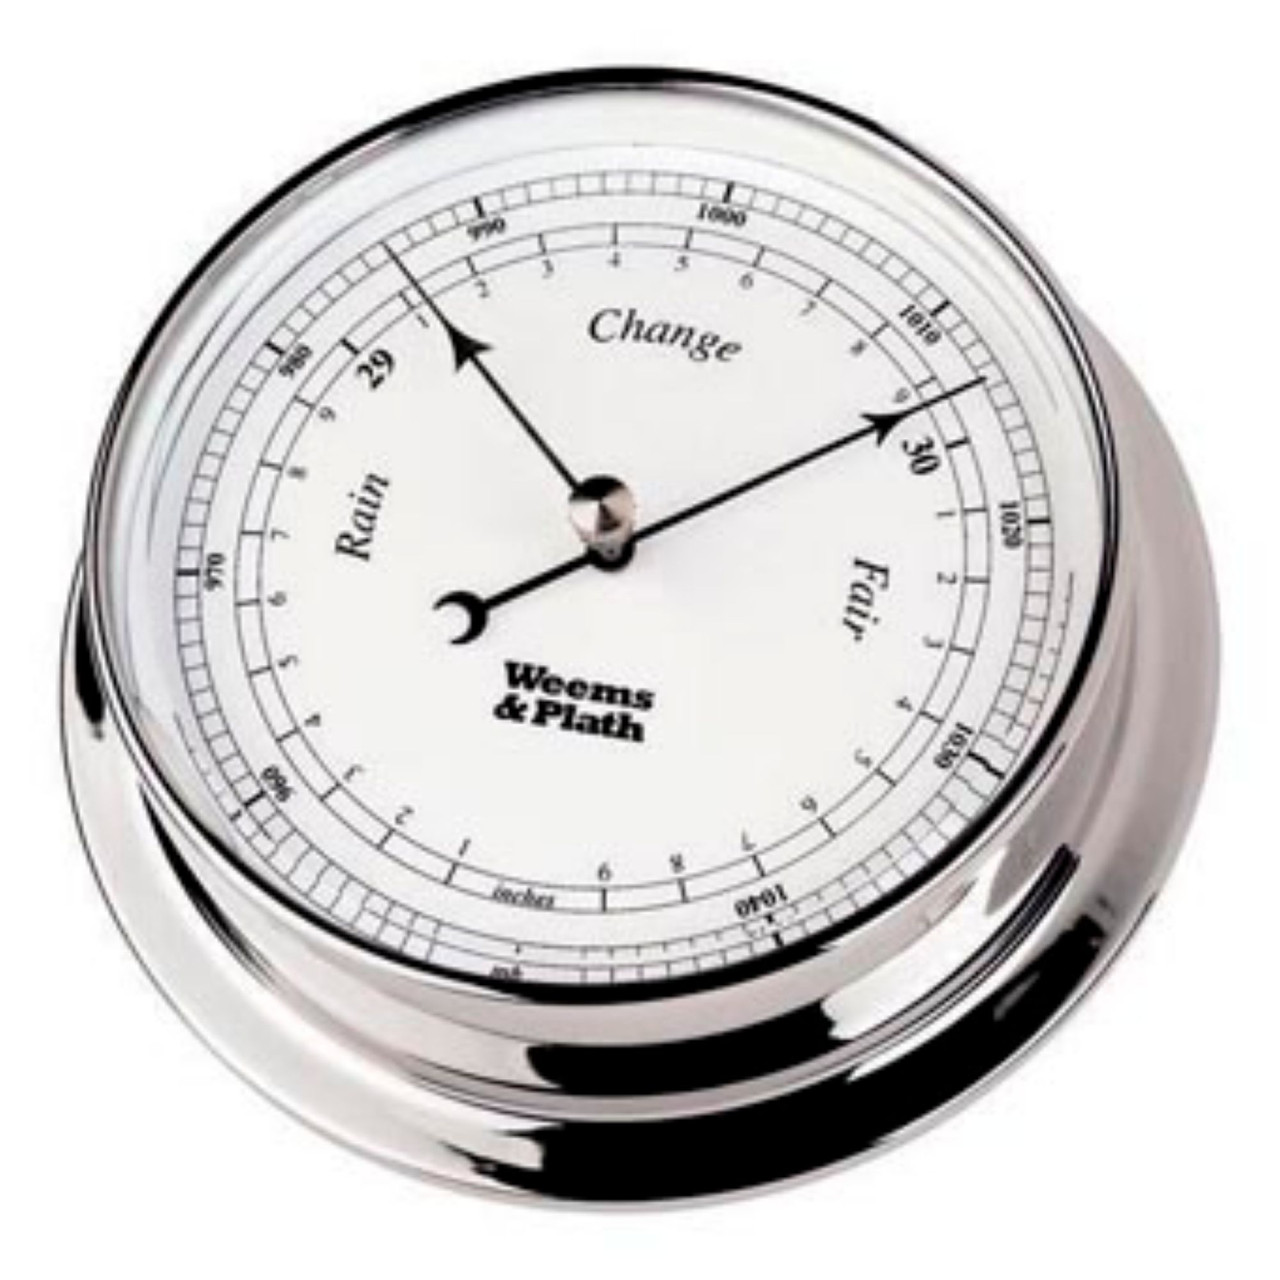 6 Silver & White Compact Adjustable Round Barometer